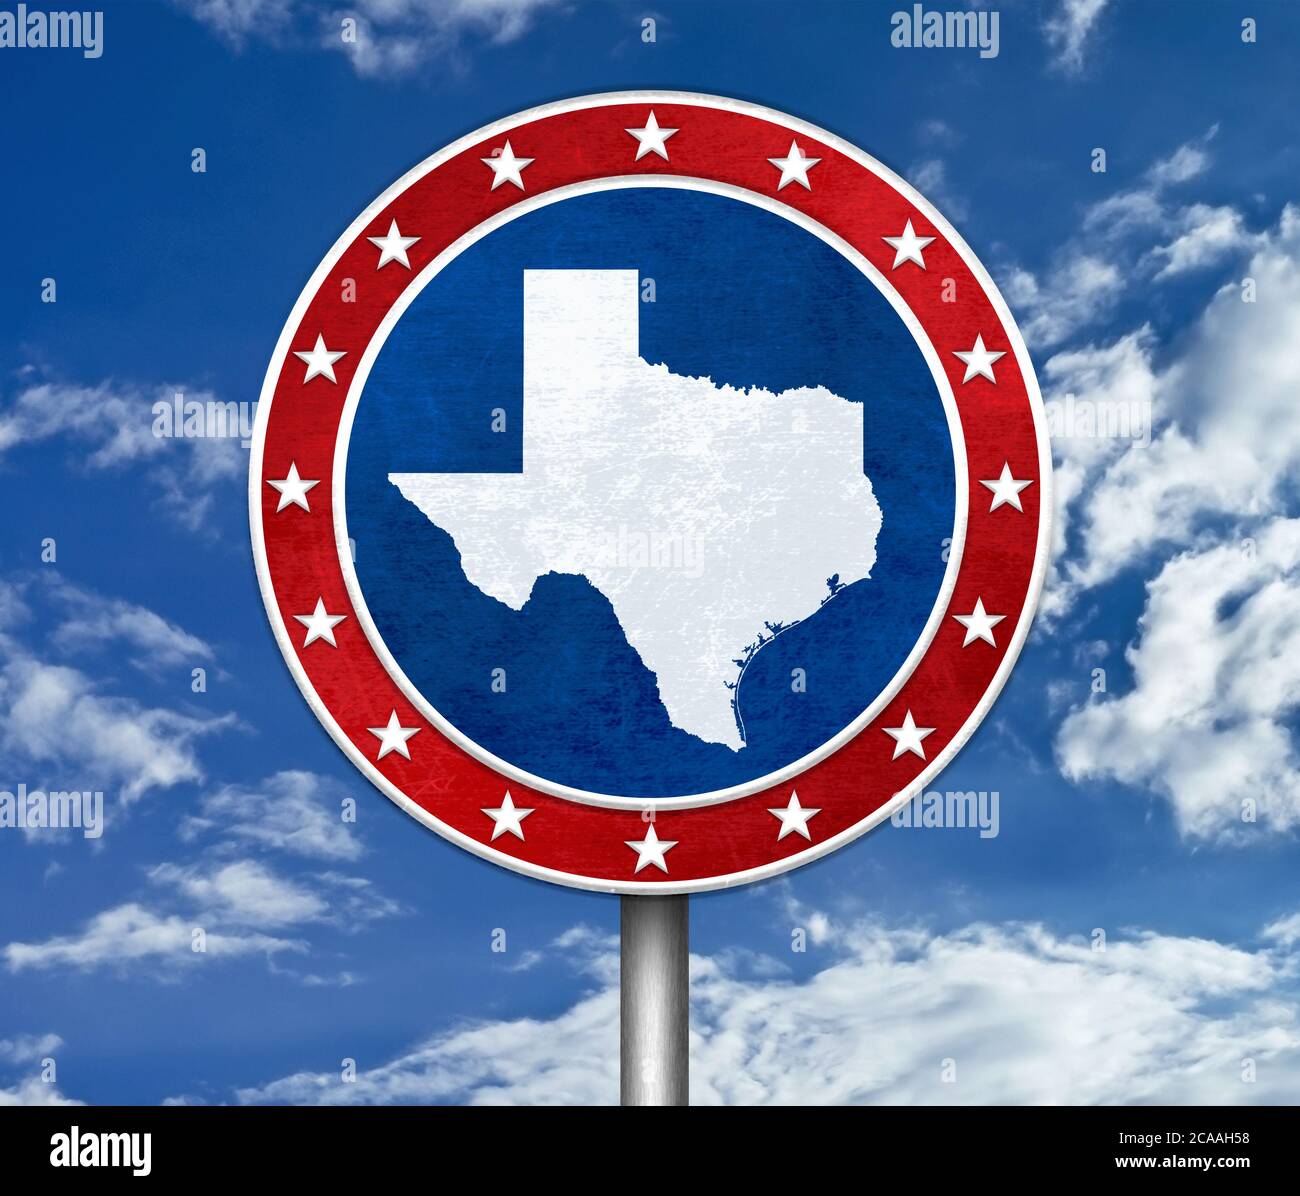 US State of Texas map illustration Stock Photo